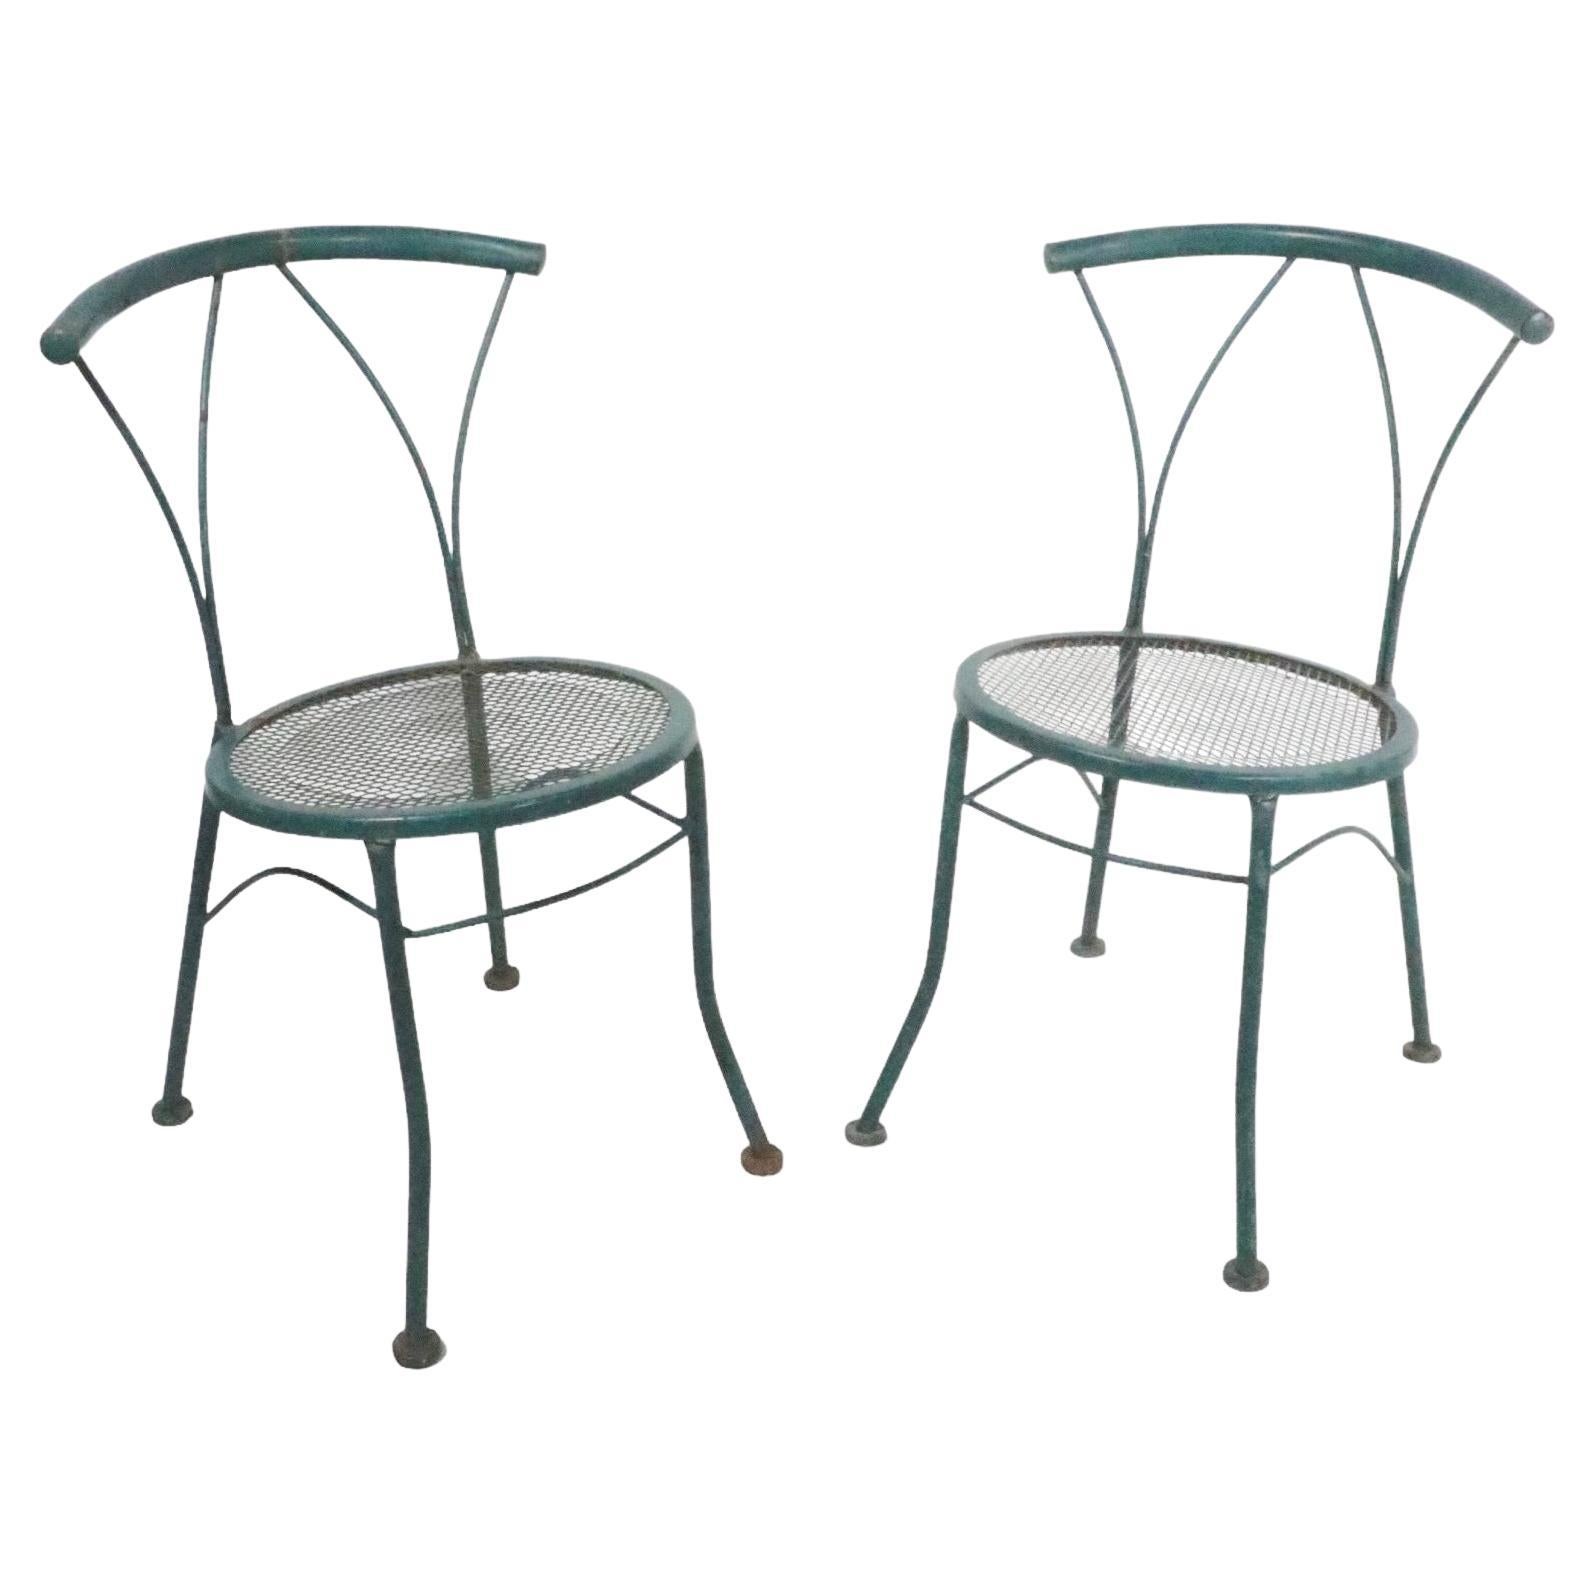 Pr. Wrought Iron and Metal Mesh Garden Patio Poolside Bistro Cafe  Dining Chairs For Sale